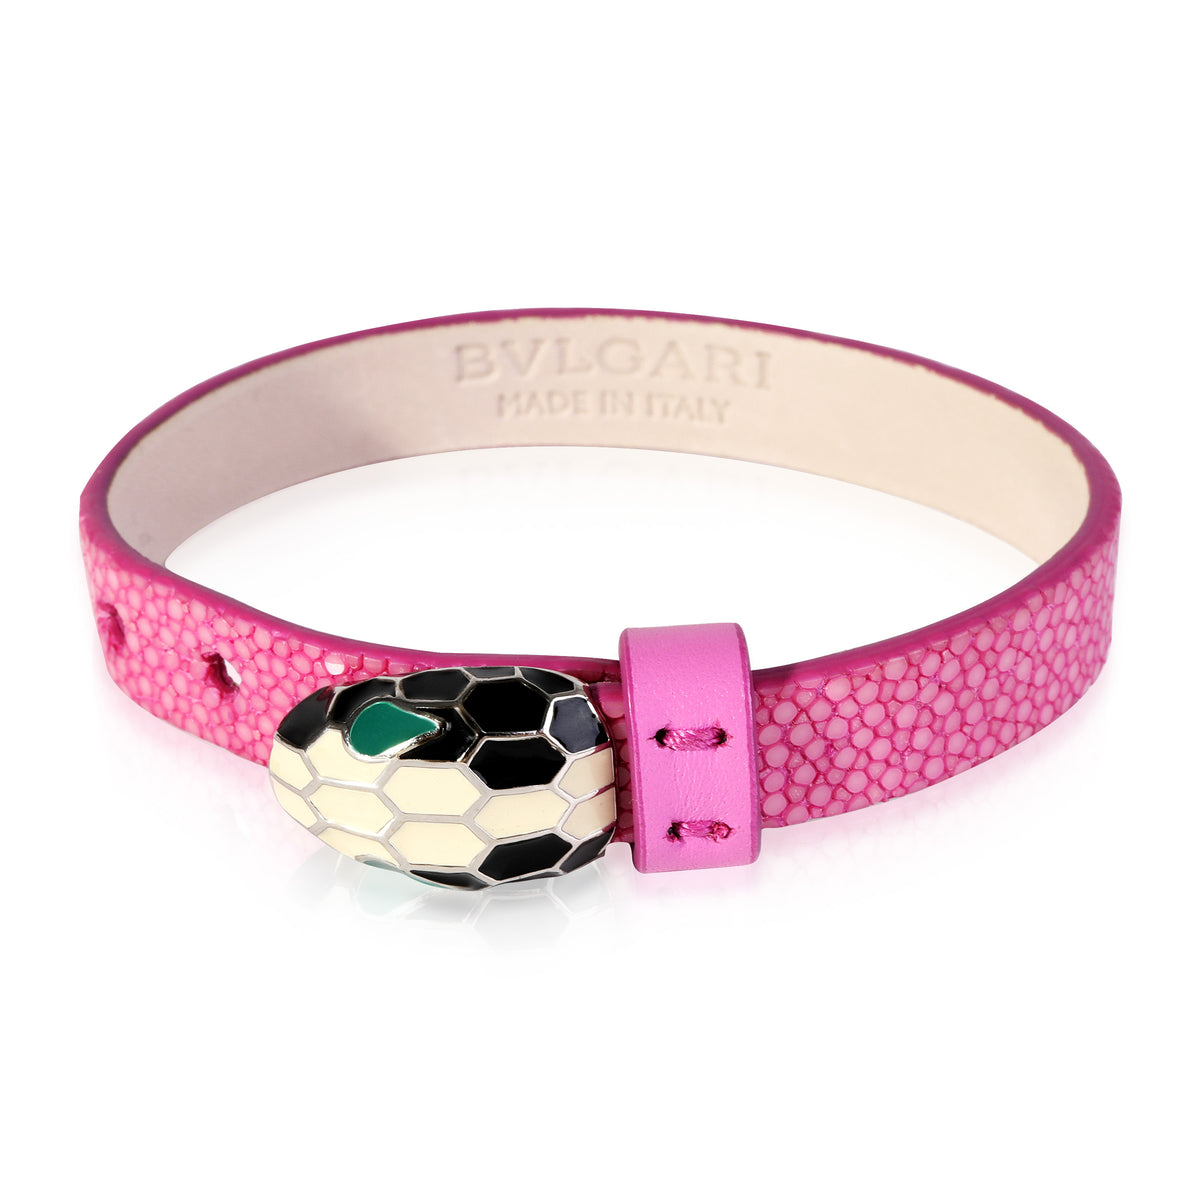 Silver Tone Bvlgari Serpenti Forever Bracelet On Pink Leather